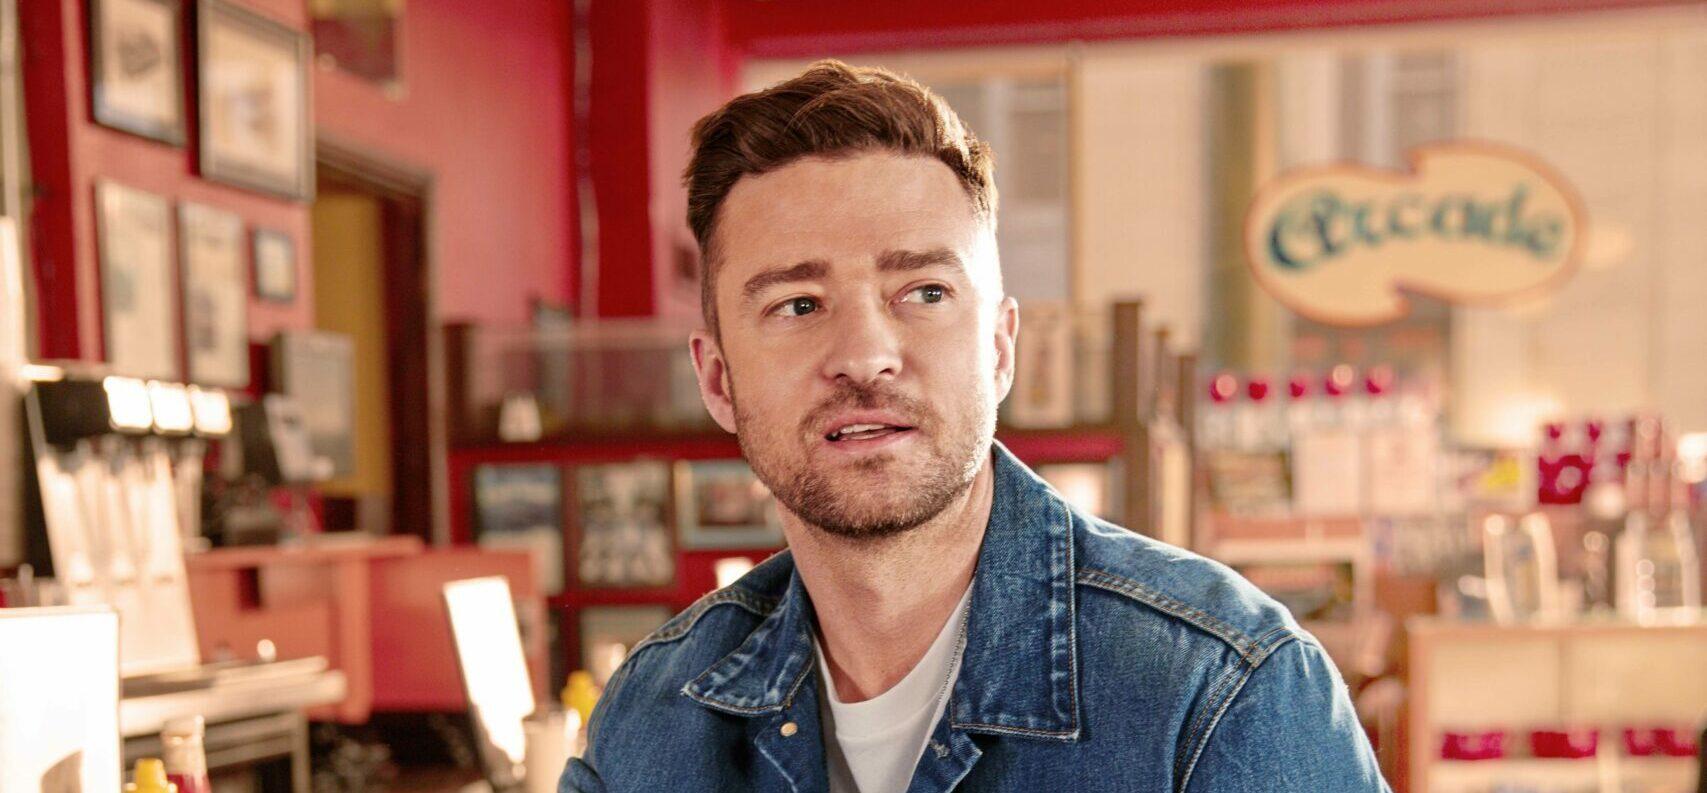 Justin Timberlake Once Said He Wouldn’t Stop Singing ‘Cry Me A River’